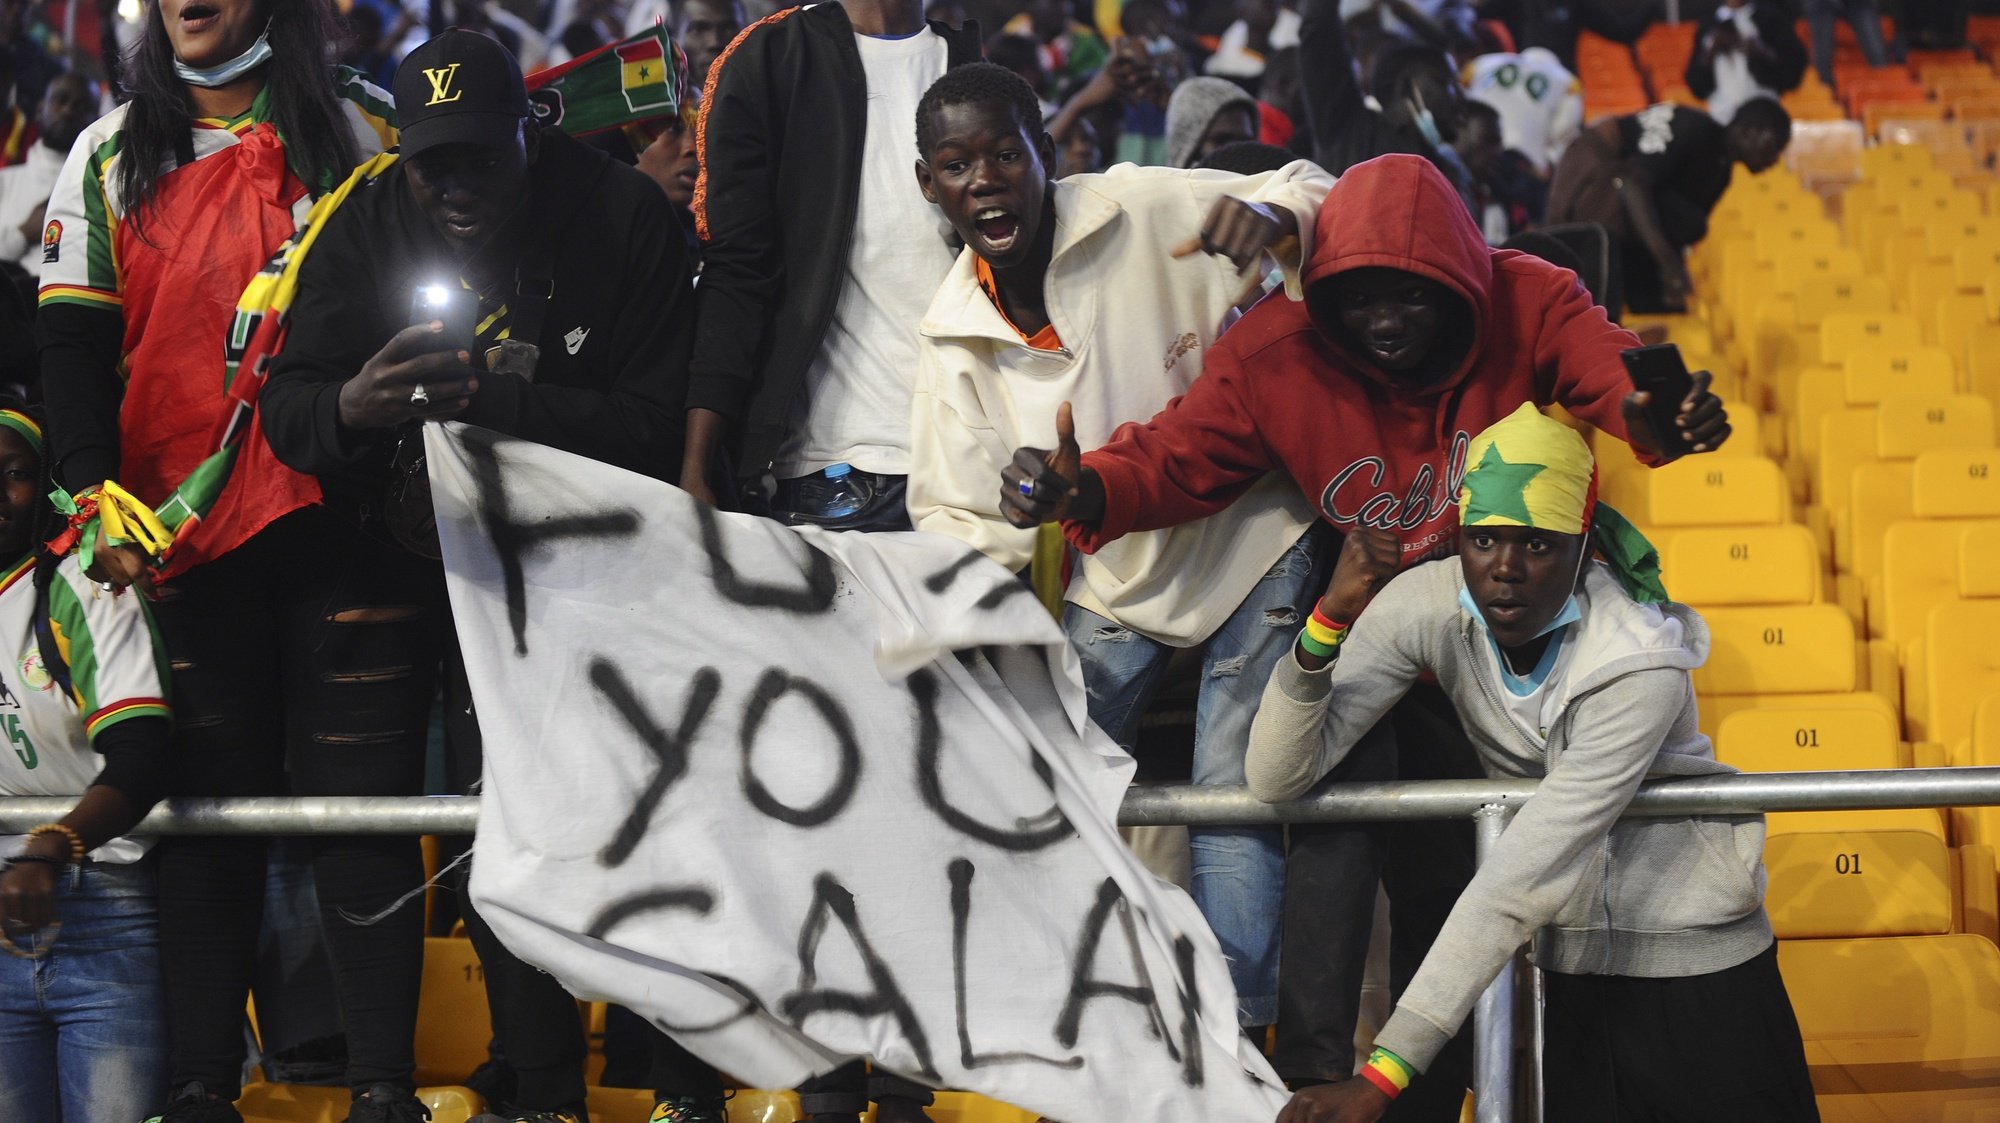 epa09859758 Senegal supporters celebrate winning the FIFA Qatar 2022 World Cup Africa qualifying match between Egypt and Senegal at the Diamniadio Olympic Stadium in Dakar, Senegal, 29 March 2022.  EPA/ALIOU MBAYE